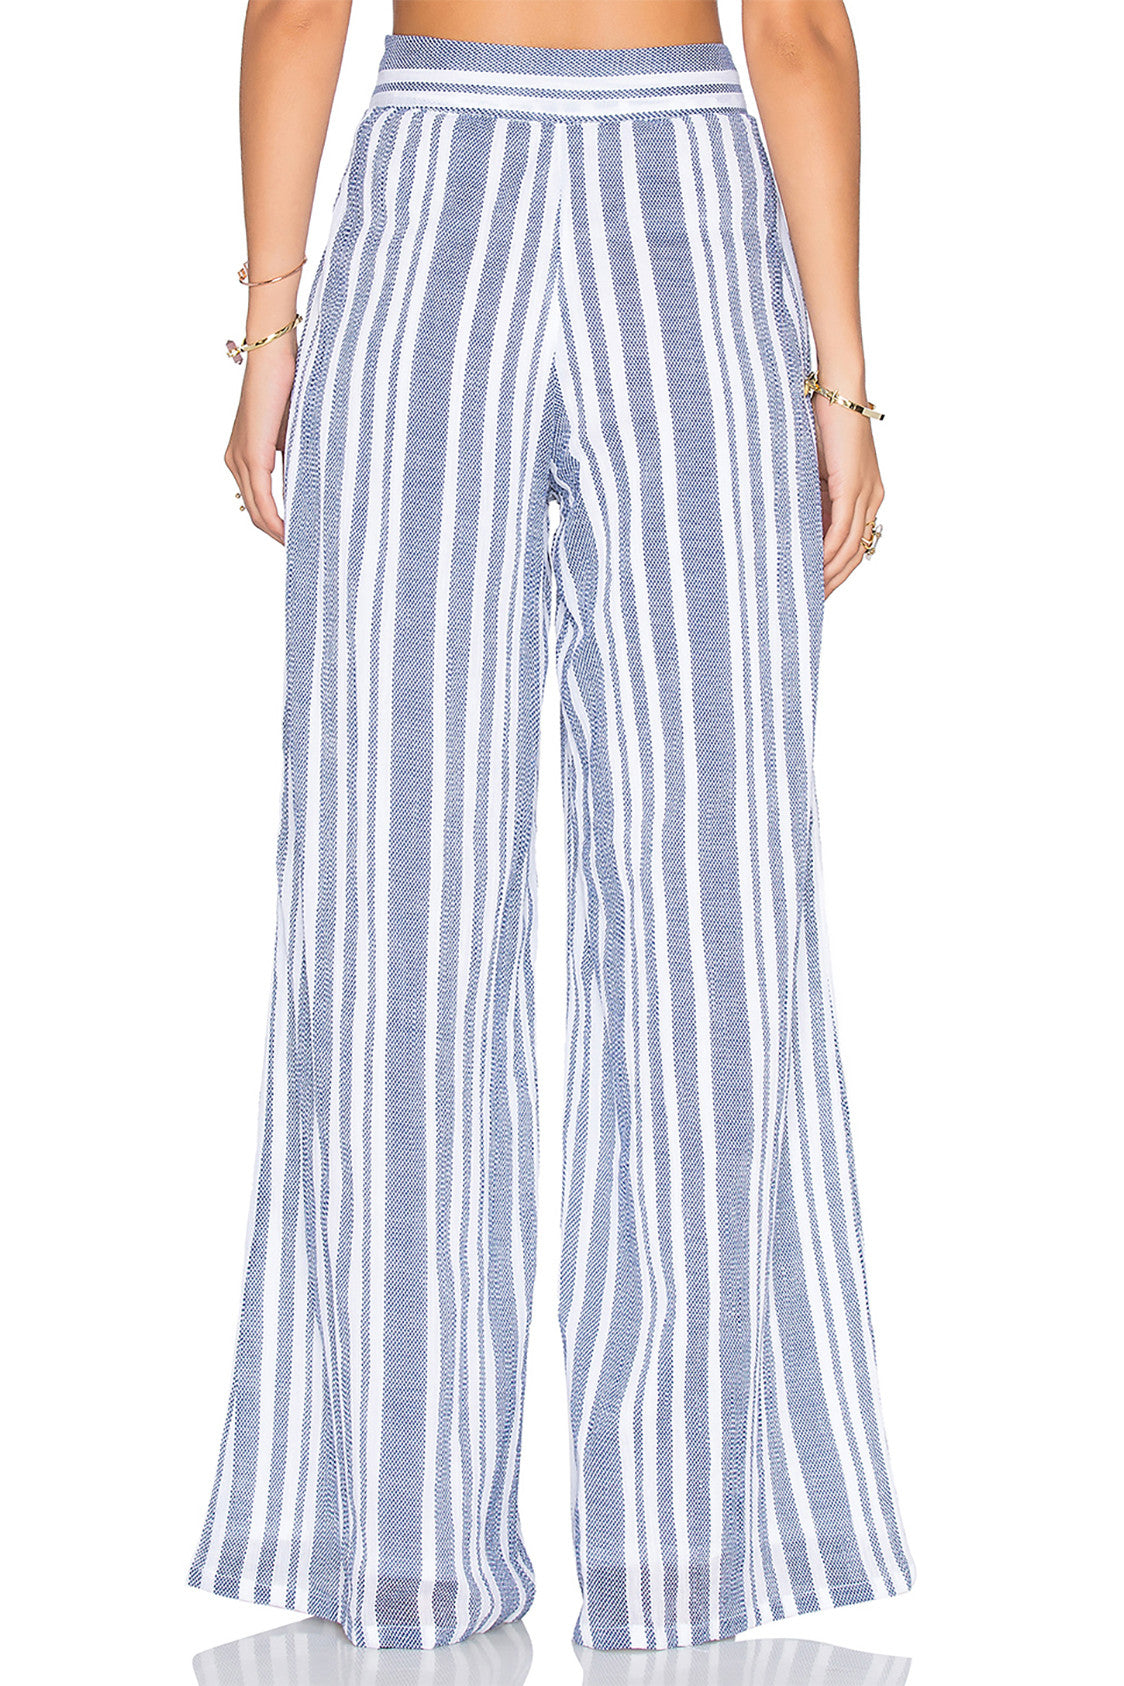 Marley Pant in BLUE/WHITE